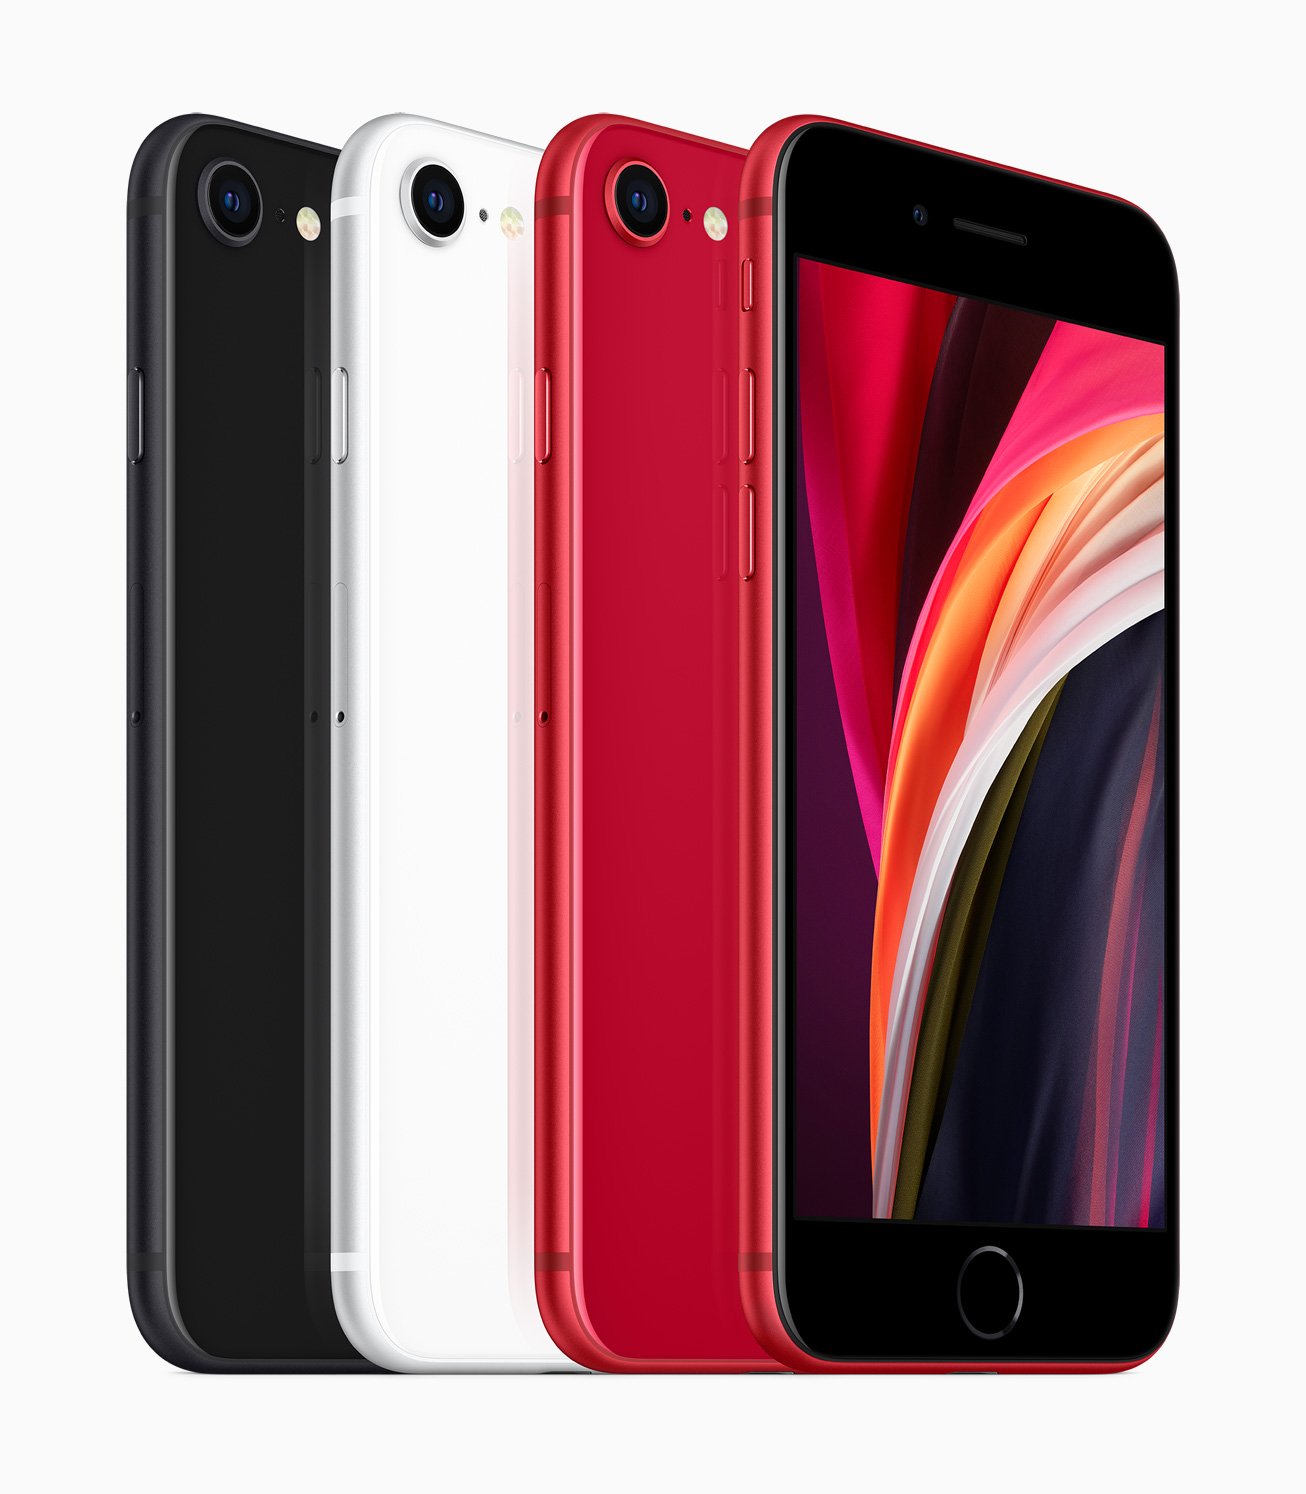 4973118_Apple_new-iphone-se-black-white-product-red-colors_04152020_inline.jpg.large_2x.jpg